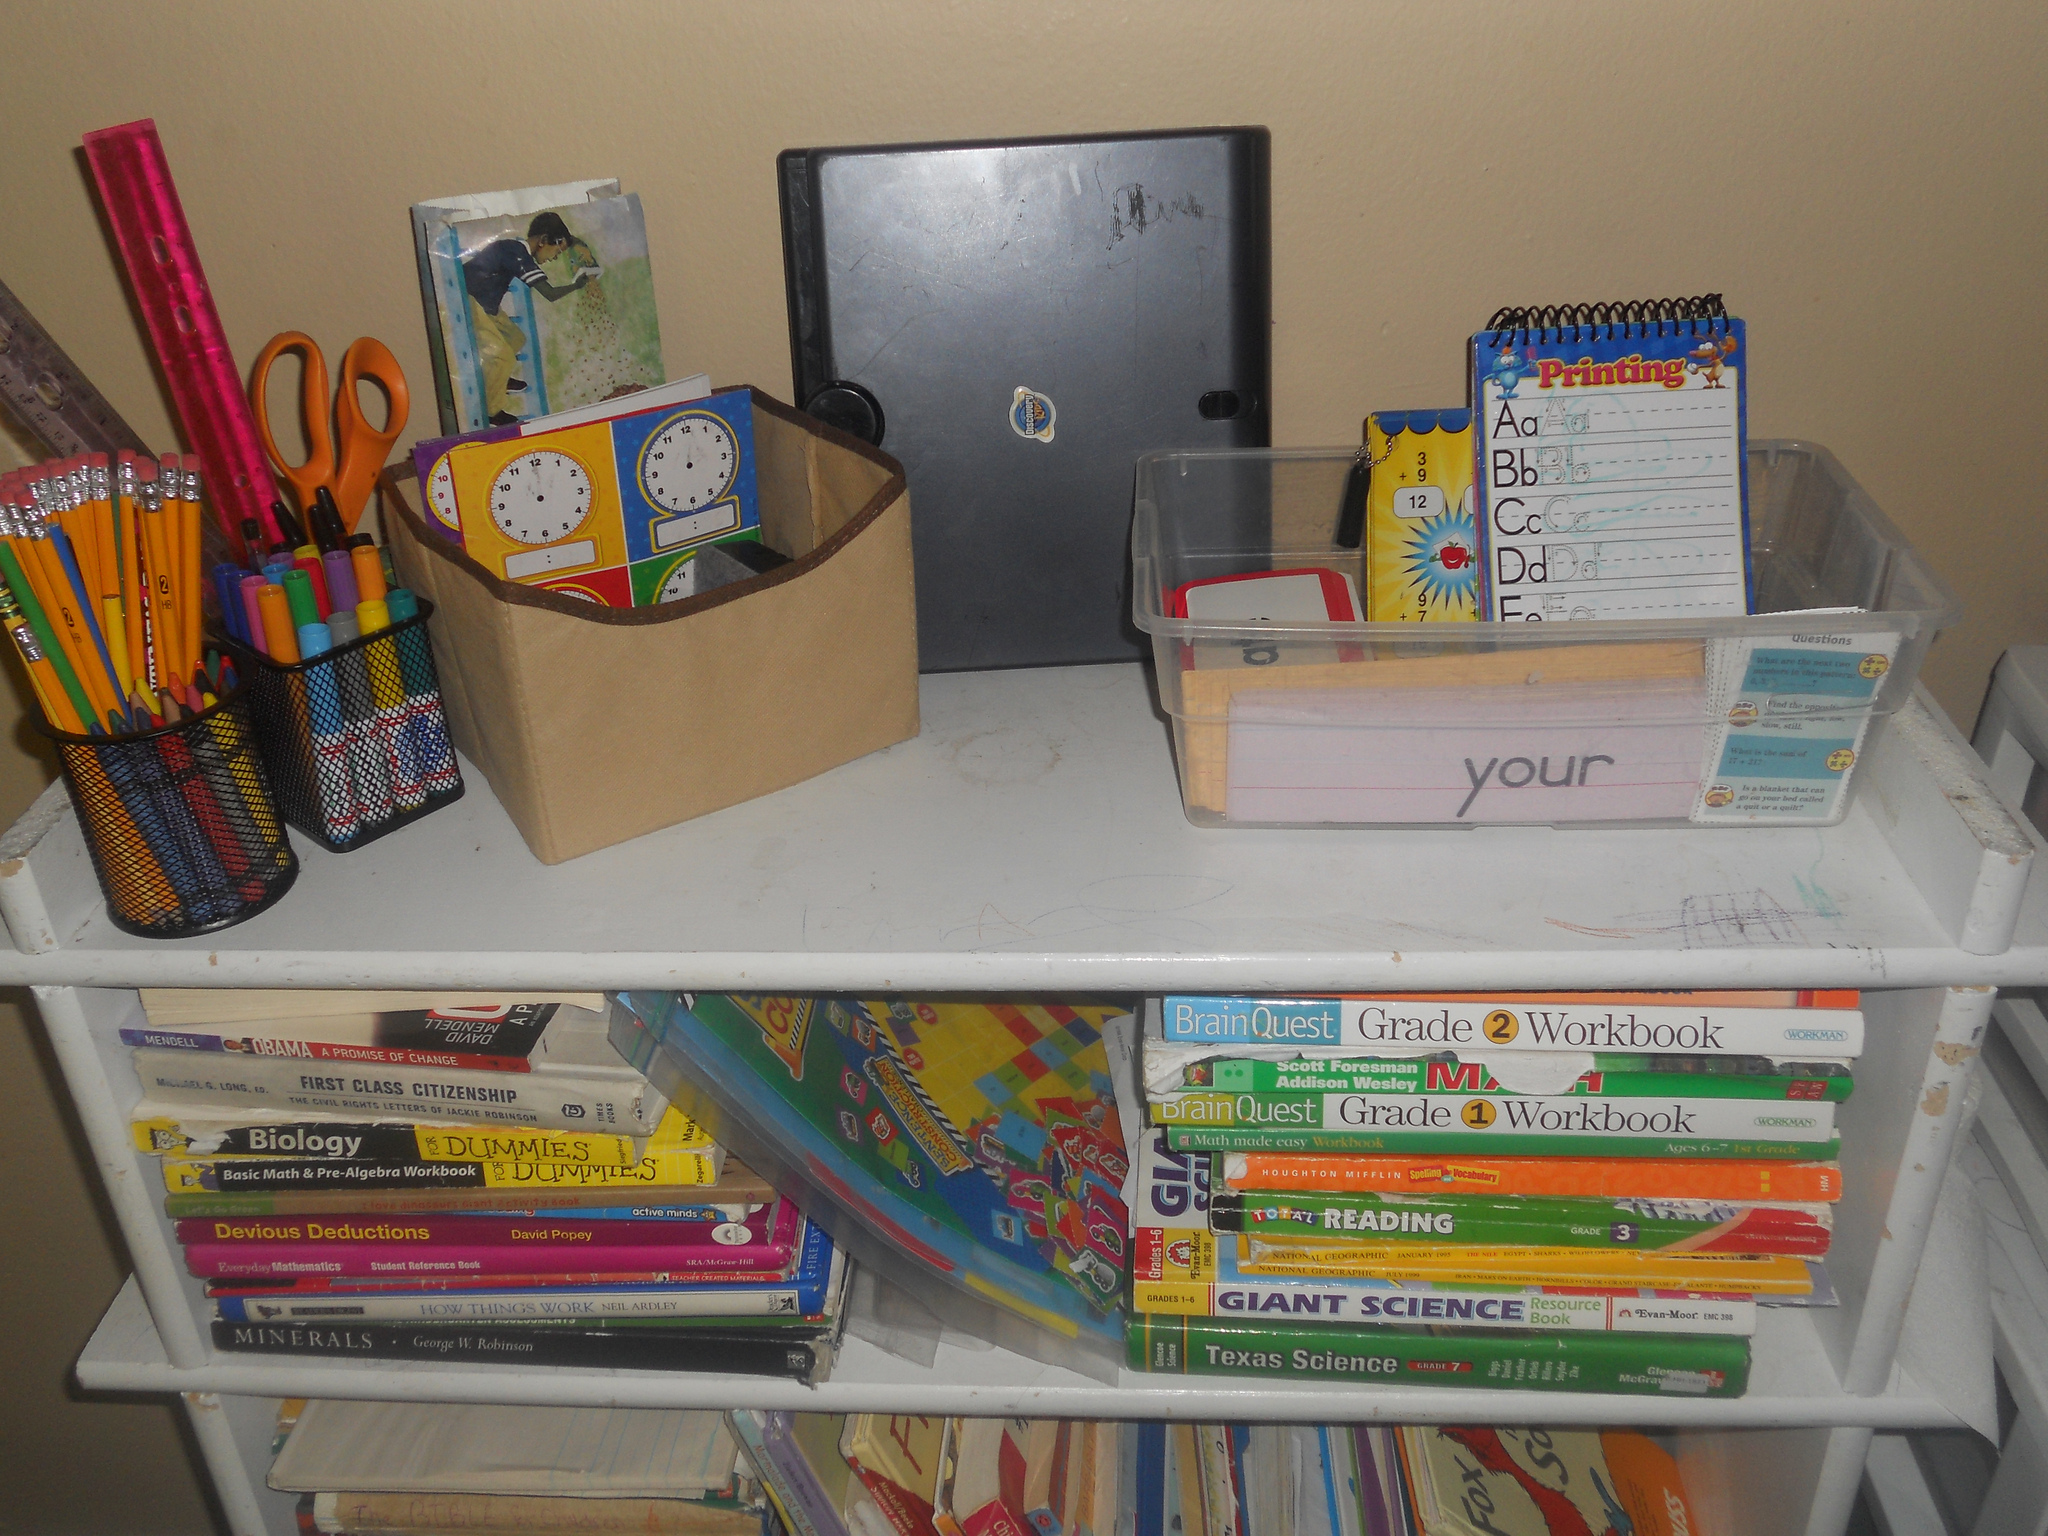 4 Things You Can Do Today to Teach Your Child How to Be Organized